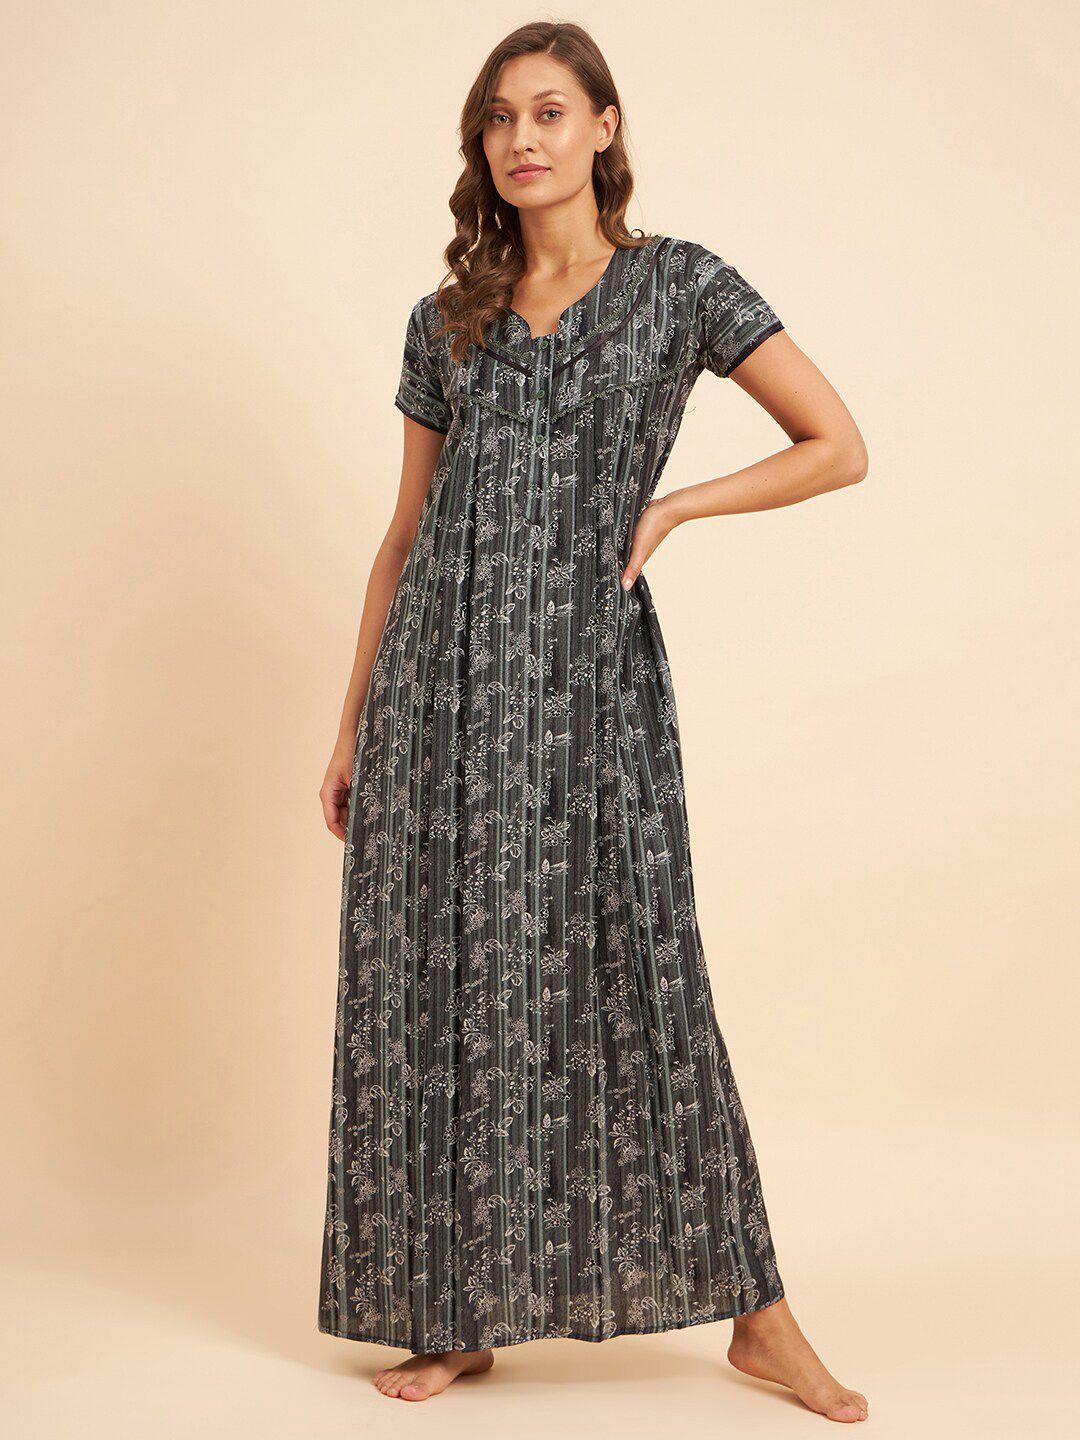 sweet-dreams-green-&-white-floral-printed-maxi-nightdress